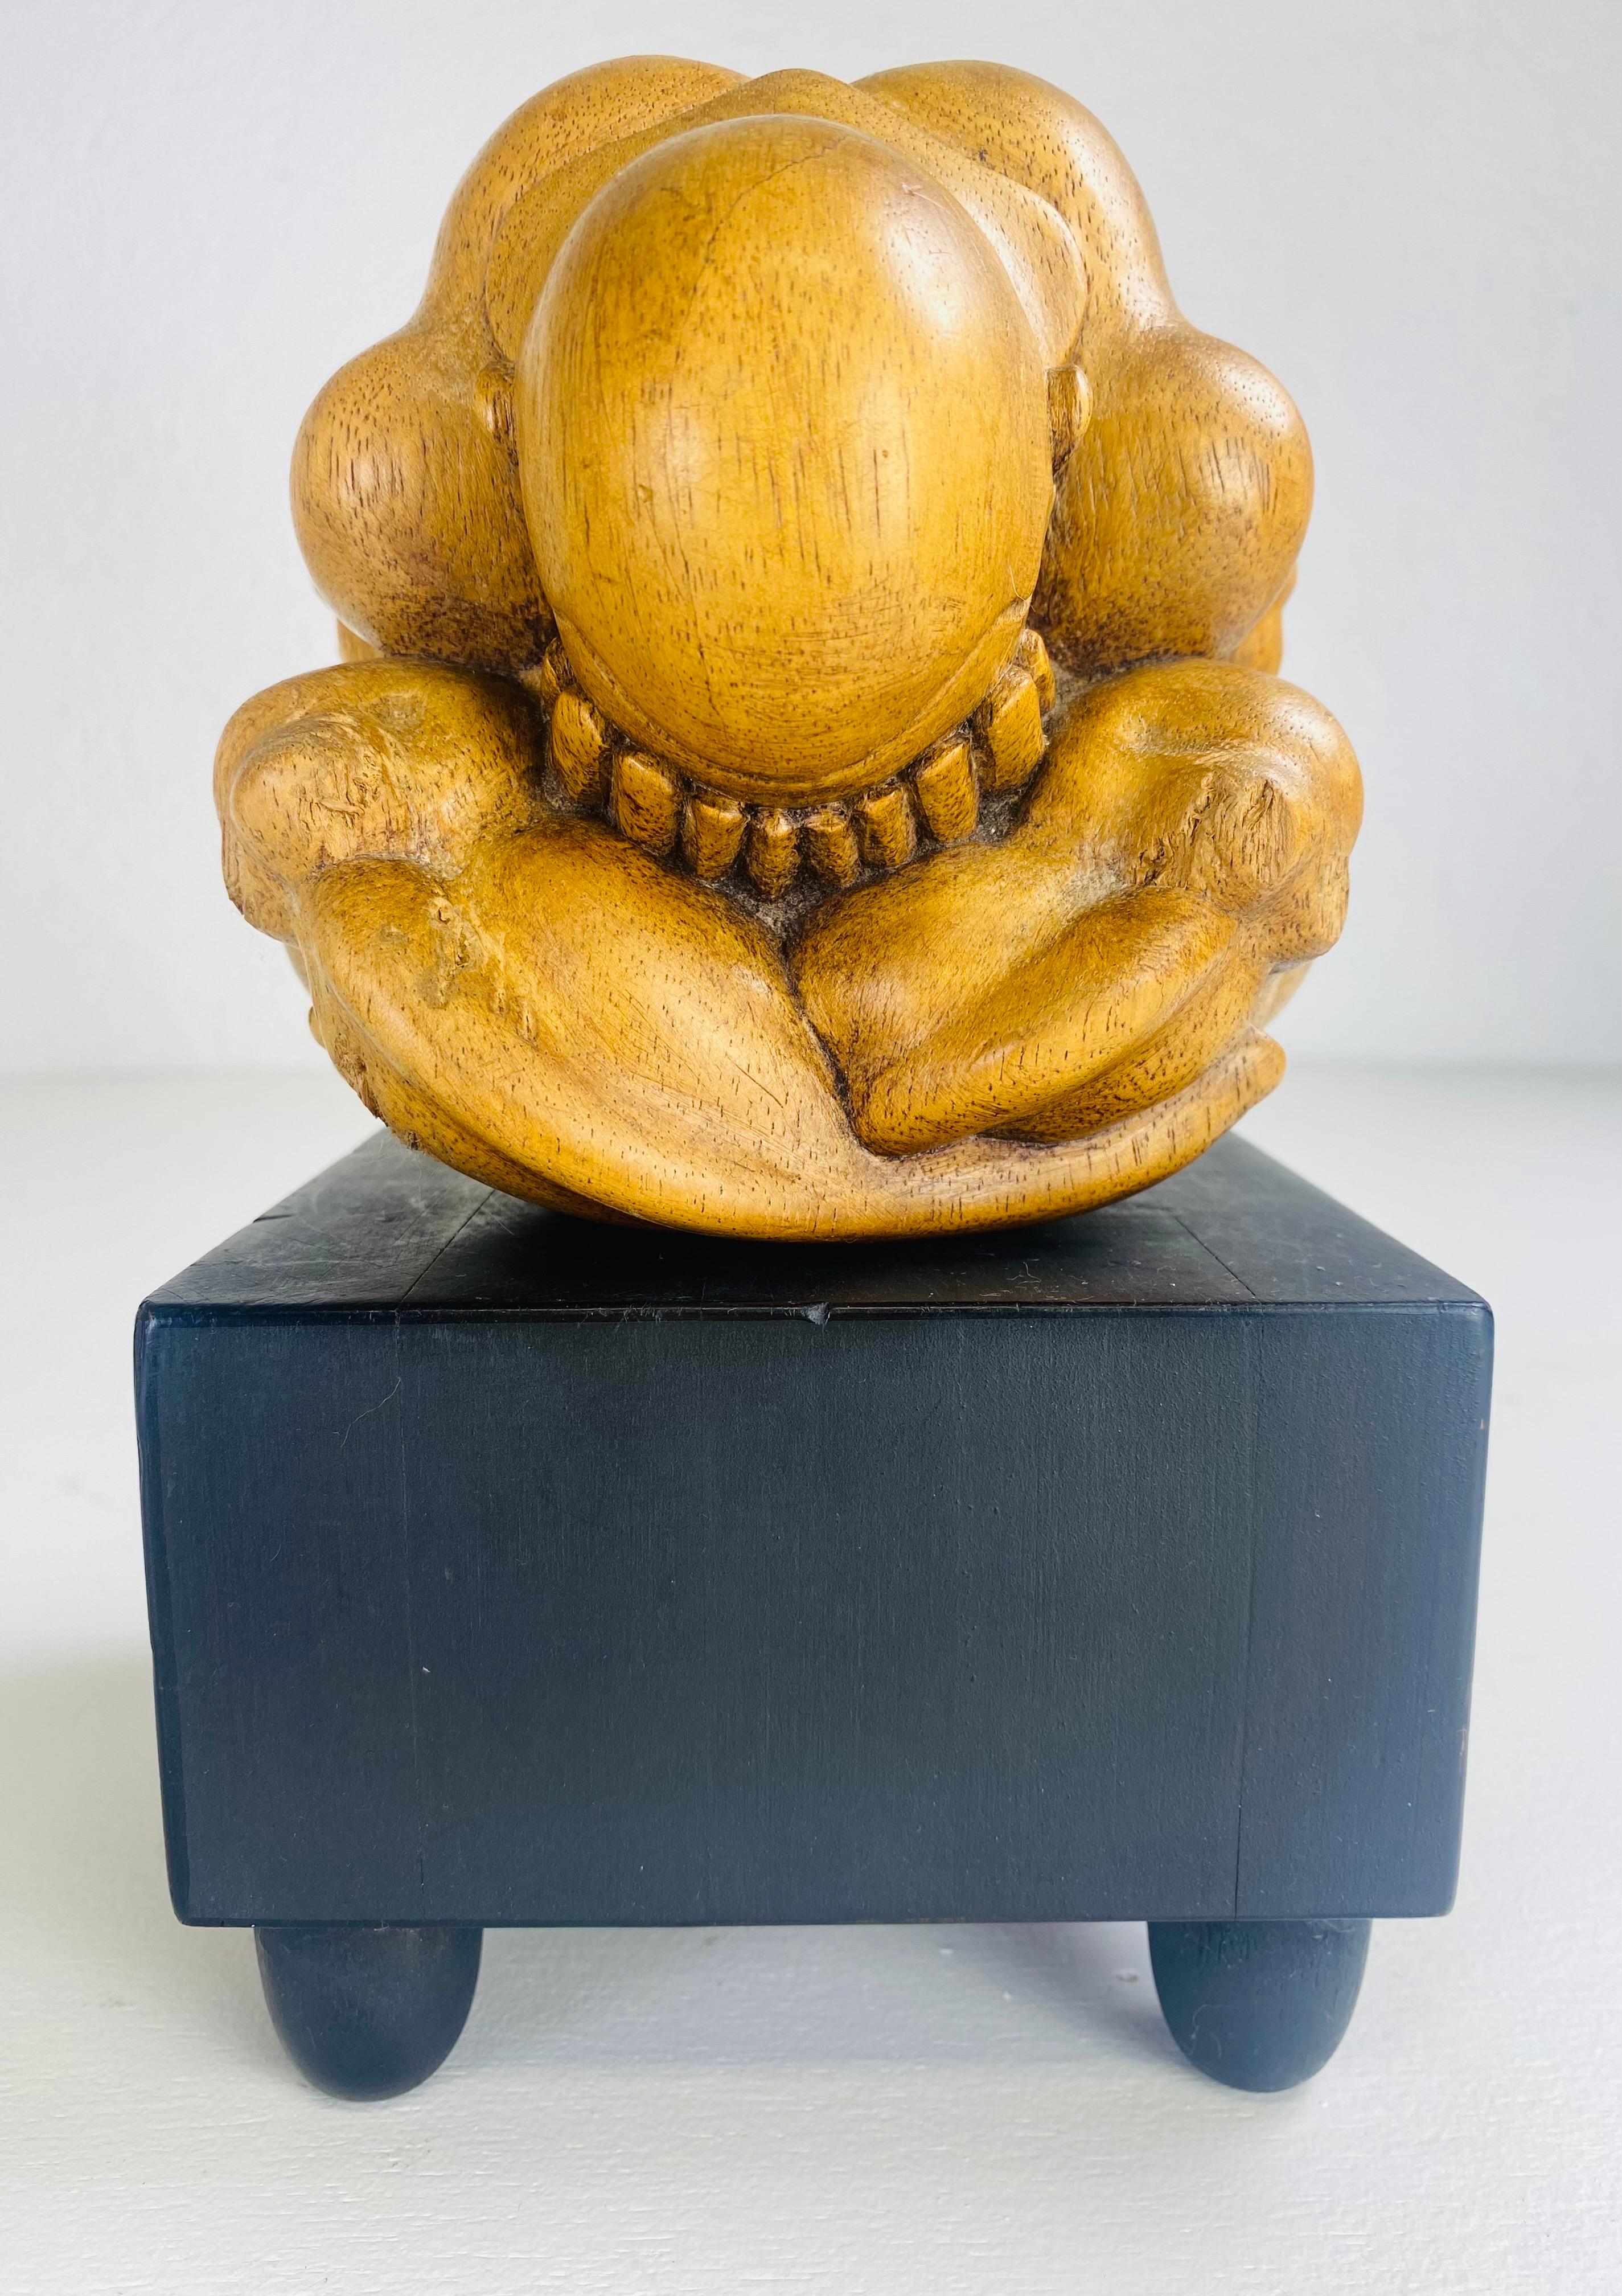 This is a handsome handcrafted male figure standing on a black pedestal. This hand carved figure is uniquely carved into a ball. The sculpture is a man folded over with his head in his hands. This carving is Asian circa 1980.